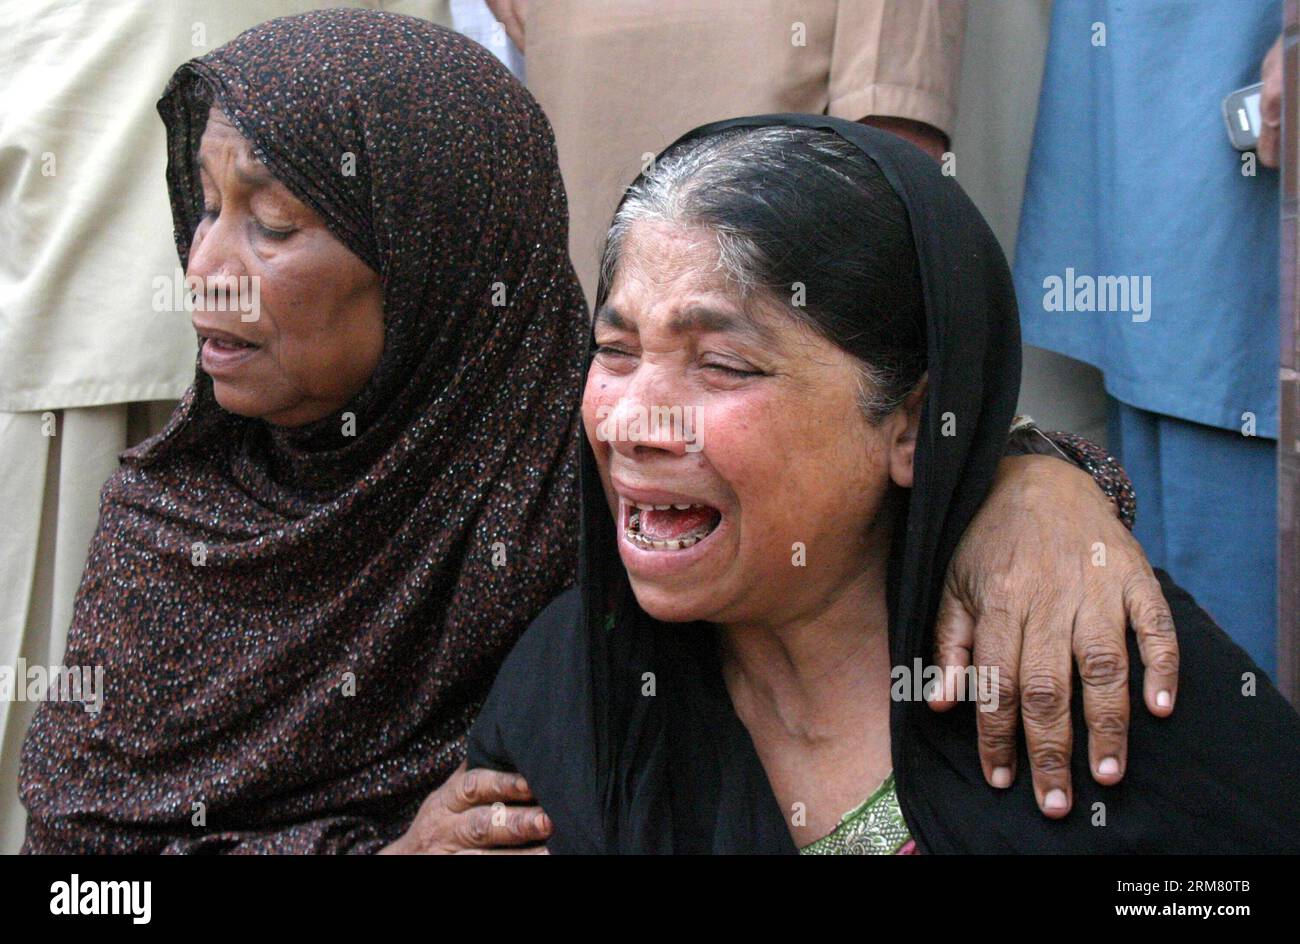 (140322) -- KARACHI, March 22, 2014 (Xinhua) -- A woman mourns over the death of her relative at a hospital in southern Pakistani port city of Karachi, March 22, 2014. At least 40 people were killed and many others injured when two passenger vans rammed into an oil tanker in southwestern Pakistan on Saturday morning, local media reported. (Xinhua/Arshad)(ctt) PAKISTAN-KARACHI-ROAD ACCIDENT PUBLICATIONxNOTxINxCHN   Karachi March 22 2014 XINHUA a Woman  Over The Death of her relative AT a Hospital in Southern Pakistani Port City of Karachi March 22 2014 AT least 40 Celebrities Were KILLED and MA Stock Photo